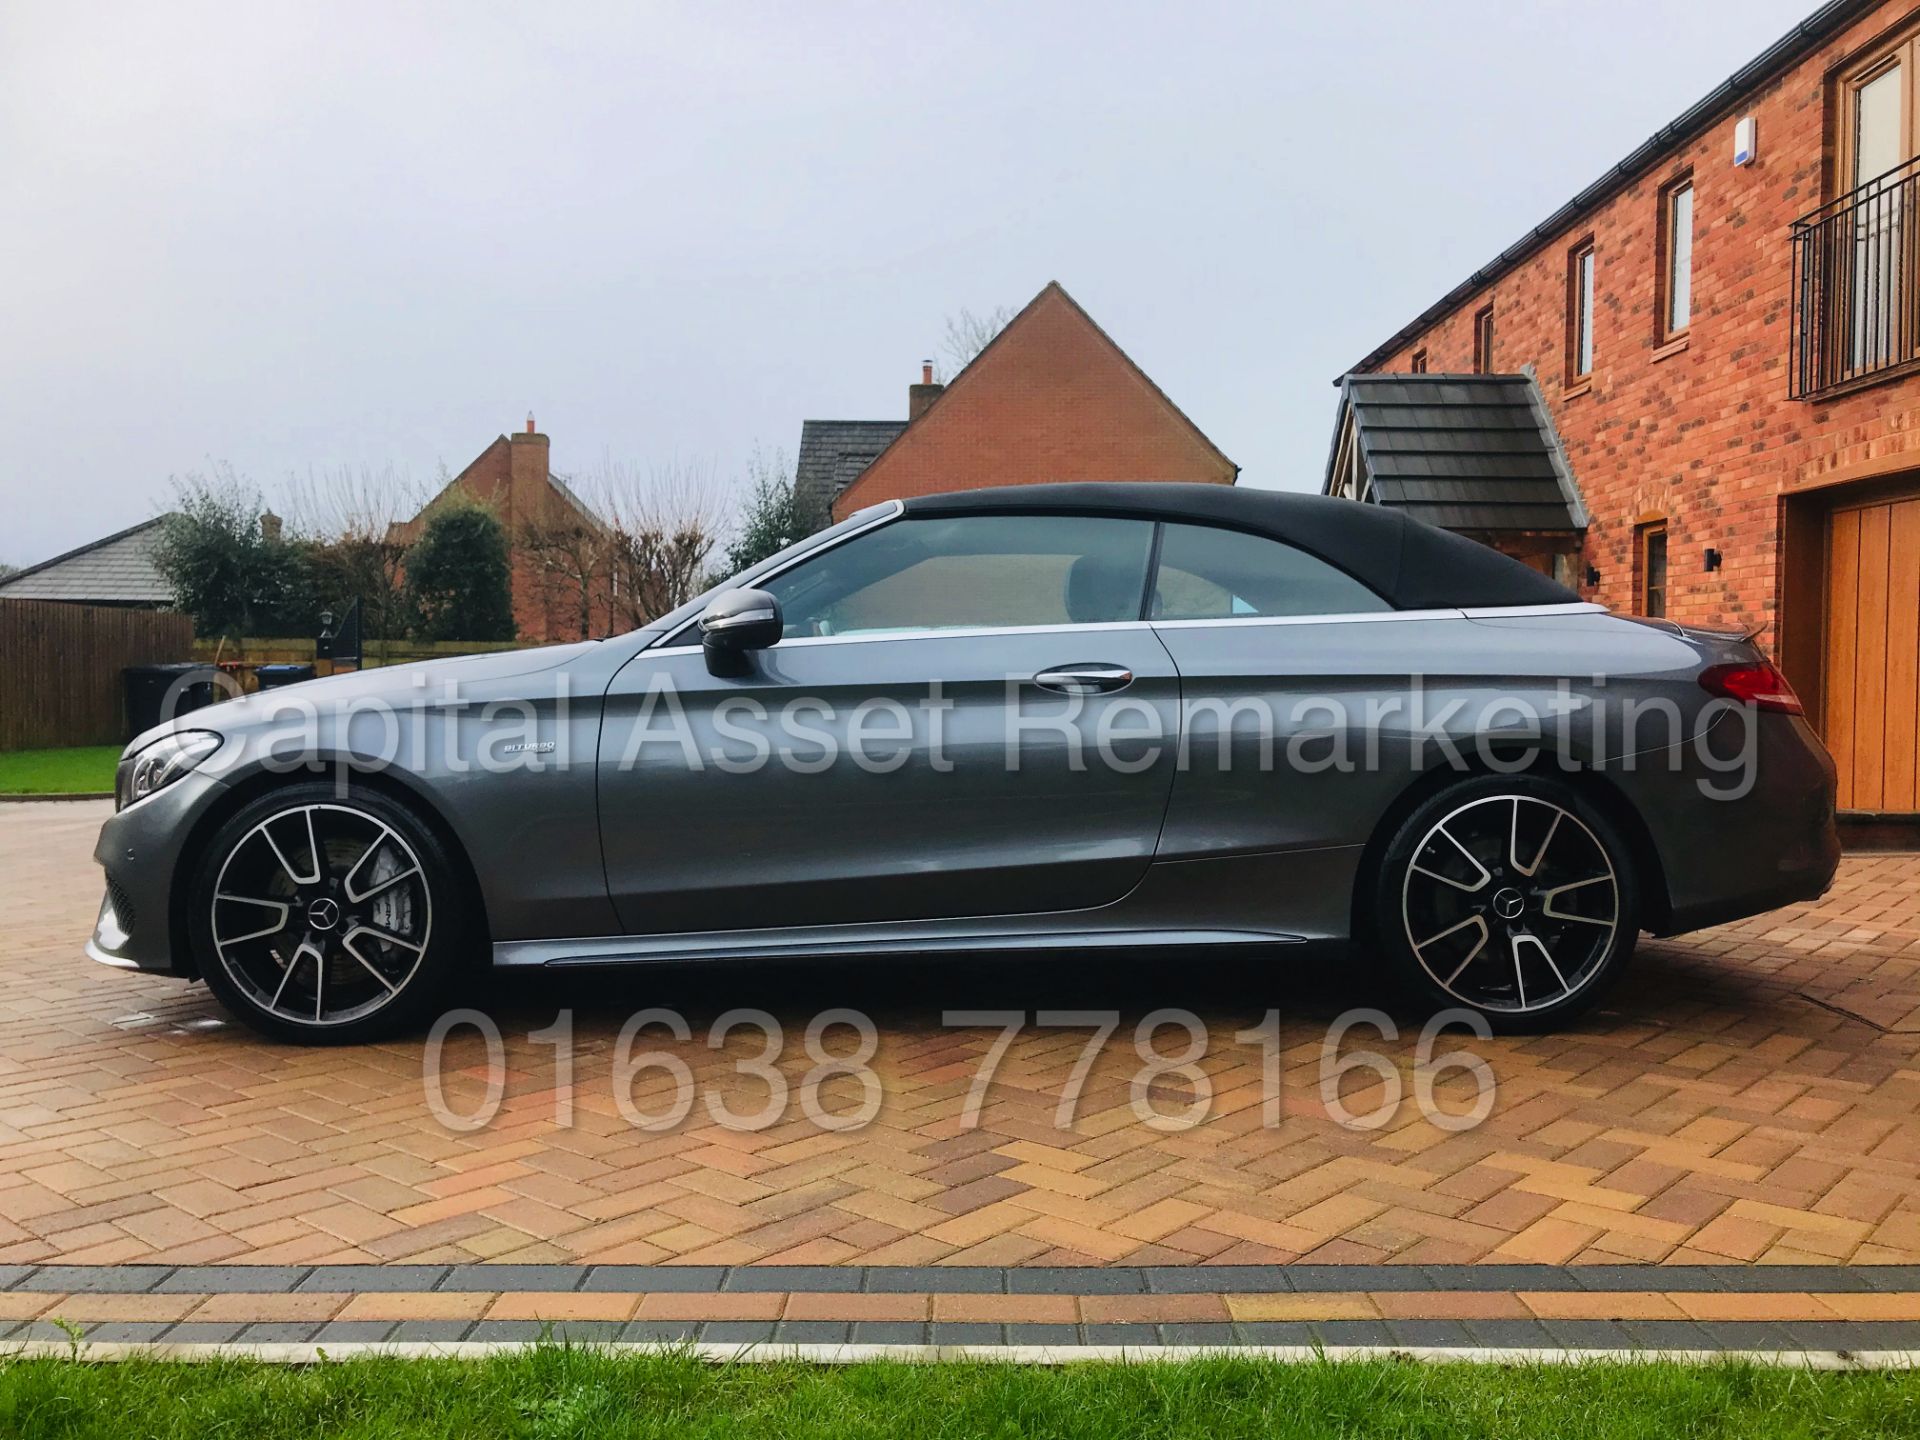 ON SALE MERCEDES-BENZ C43 *AMG BI-TURBO* CABRIOLET (2017) '3.0 V6 - 367 BHP - 4 MATIC - 9 SPEED AUTO - Image 19 of 59